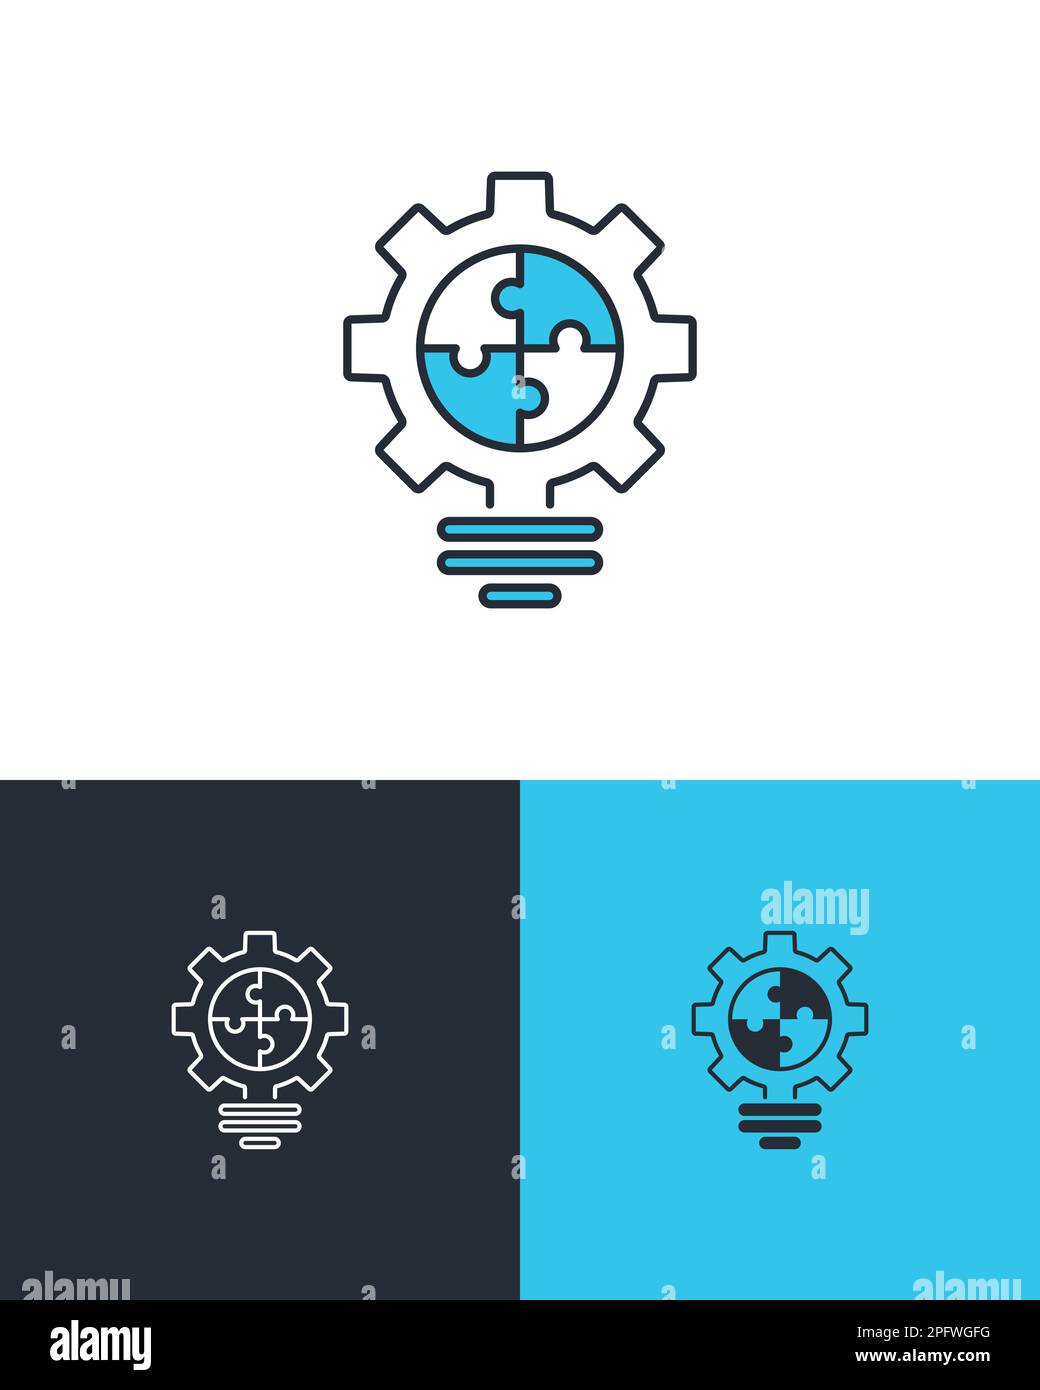 Light bulb isolated symbol with puzzle and gear. Innovative strategic ideas concept design. Vector icons on 3 different backgrounds. Stock Vector